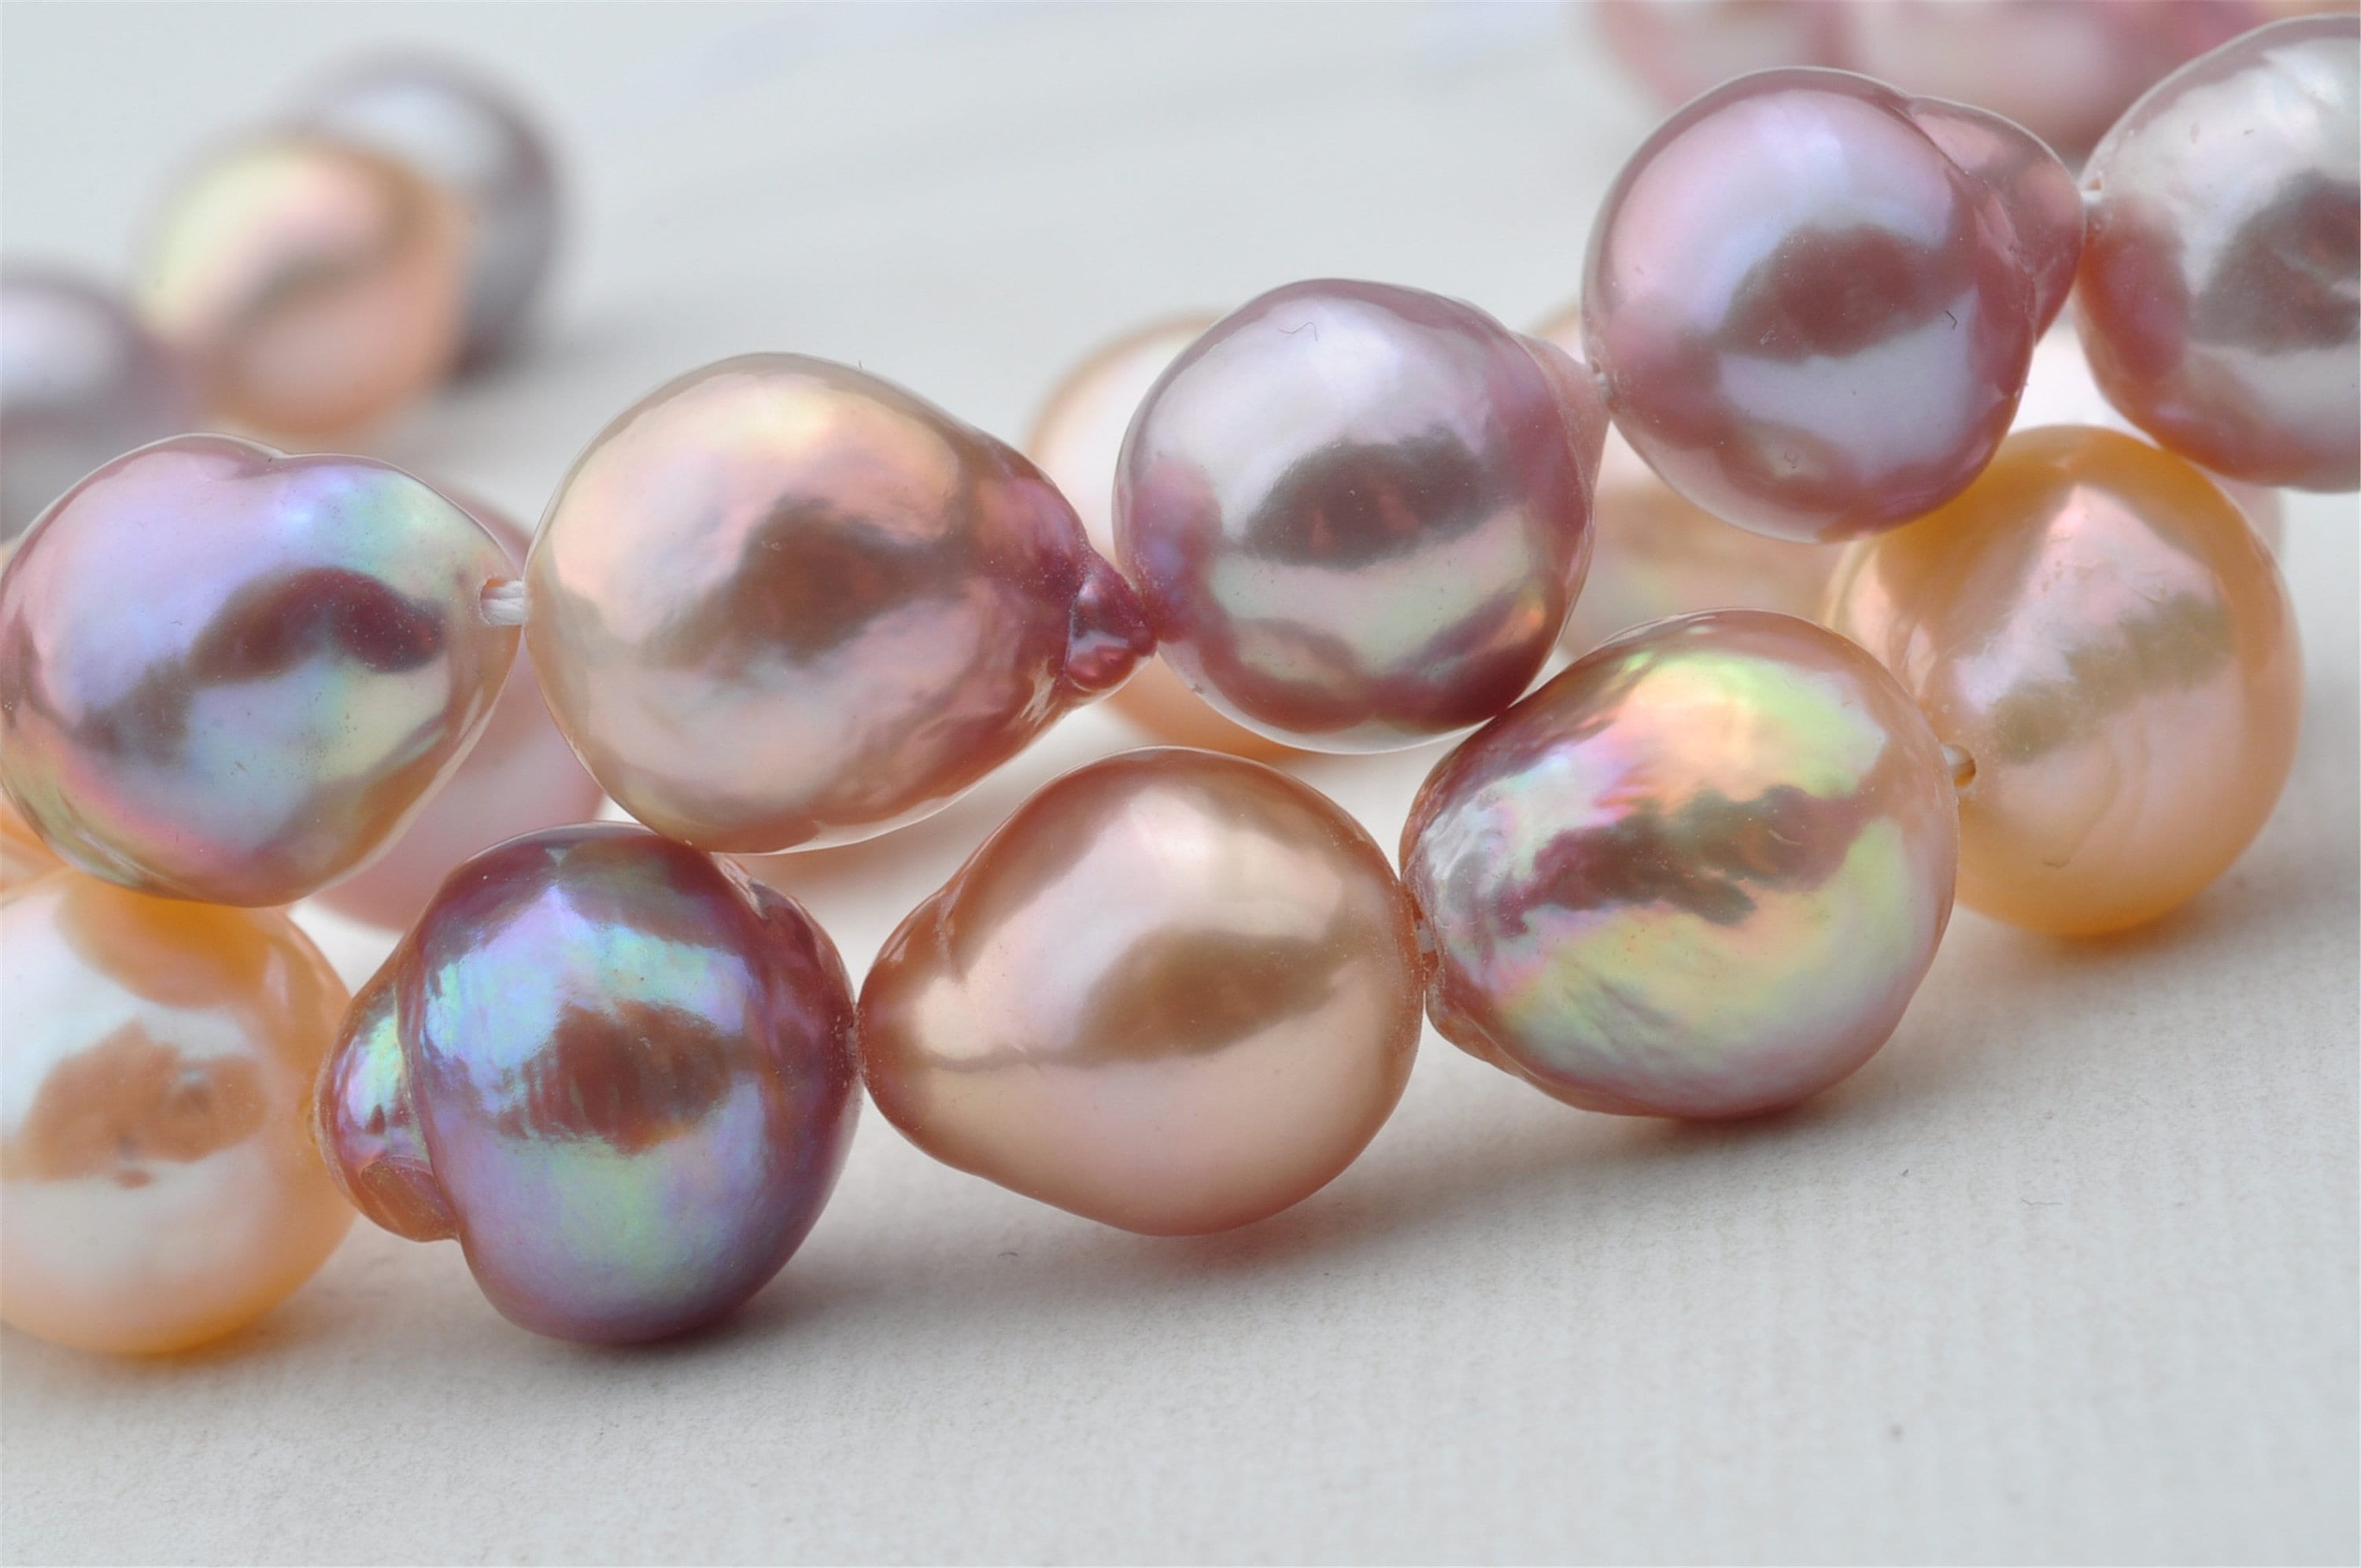 Natural Near Round Freshwater Cultured Pearls Beads for Jewelry Making DIY  (10.5mm/Big White Nuclear Edison Pearls)